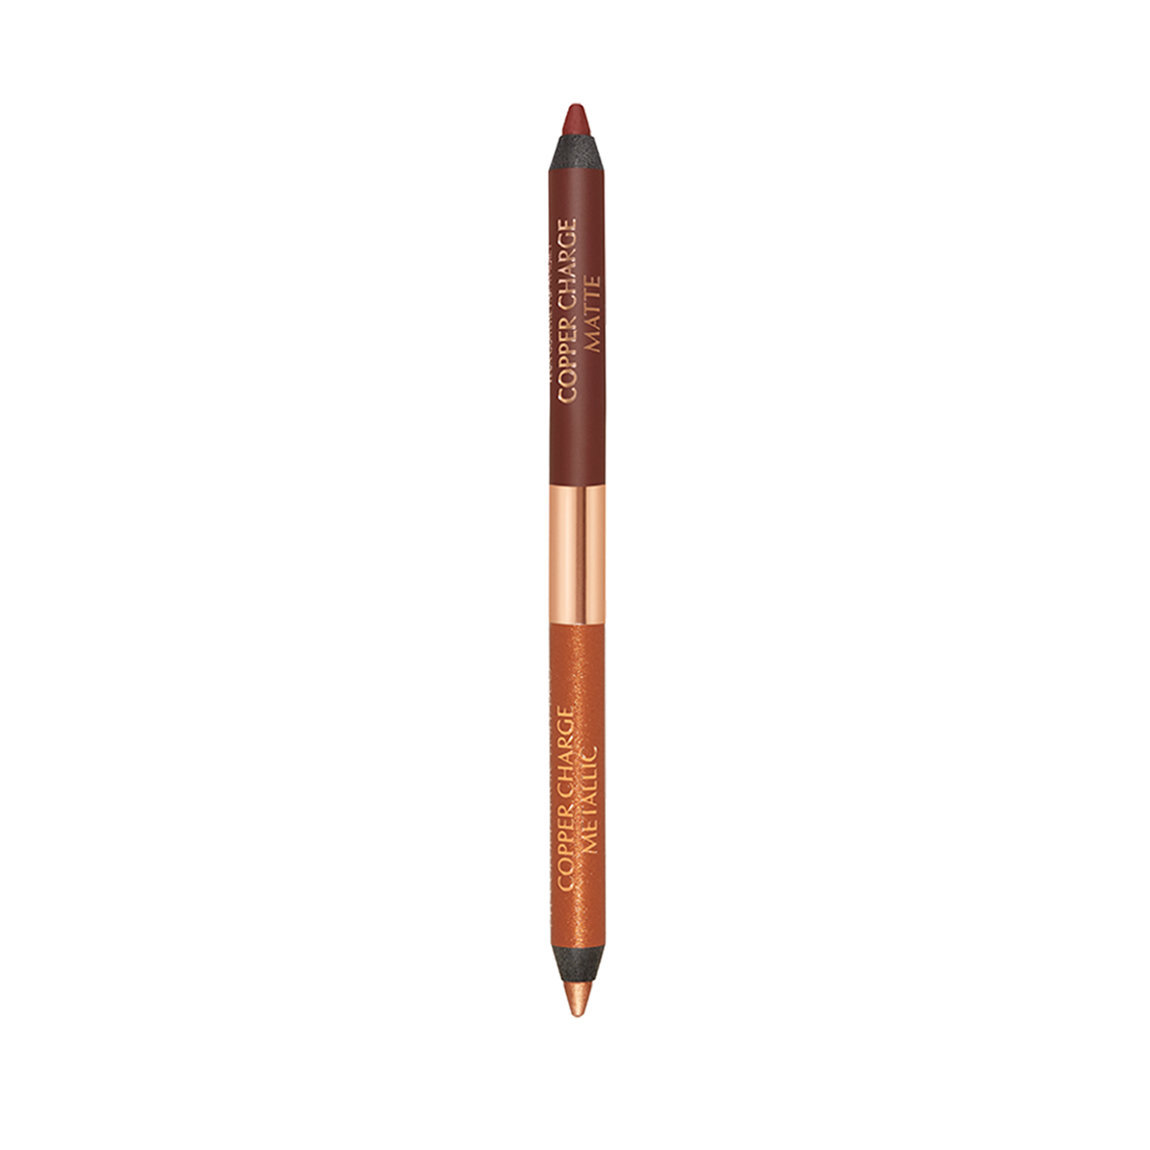 Charlotte Tilbury Eye Colour Magic Liner Duo Copper Charge alternative view 1.